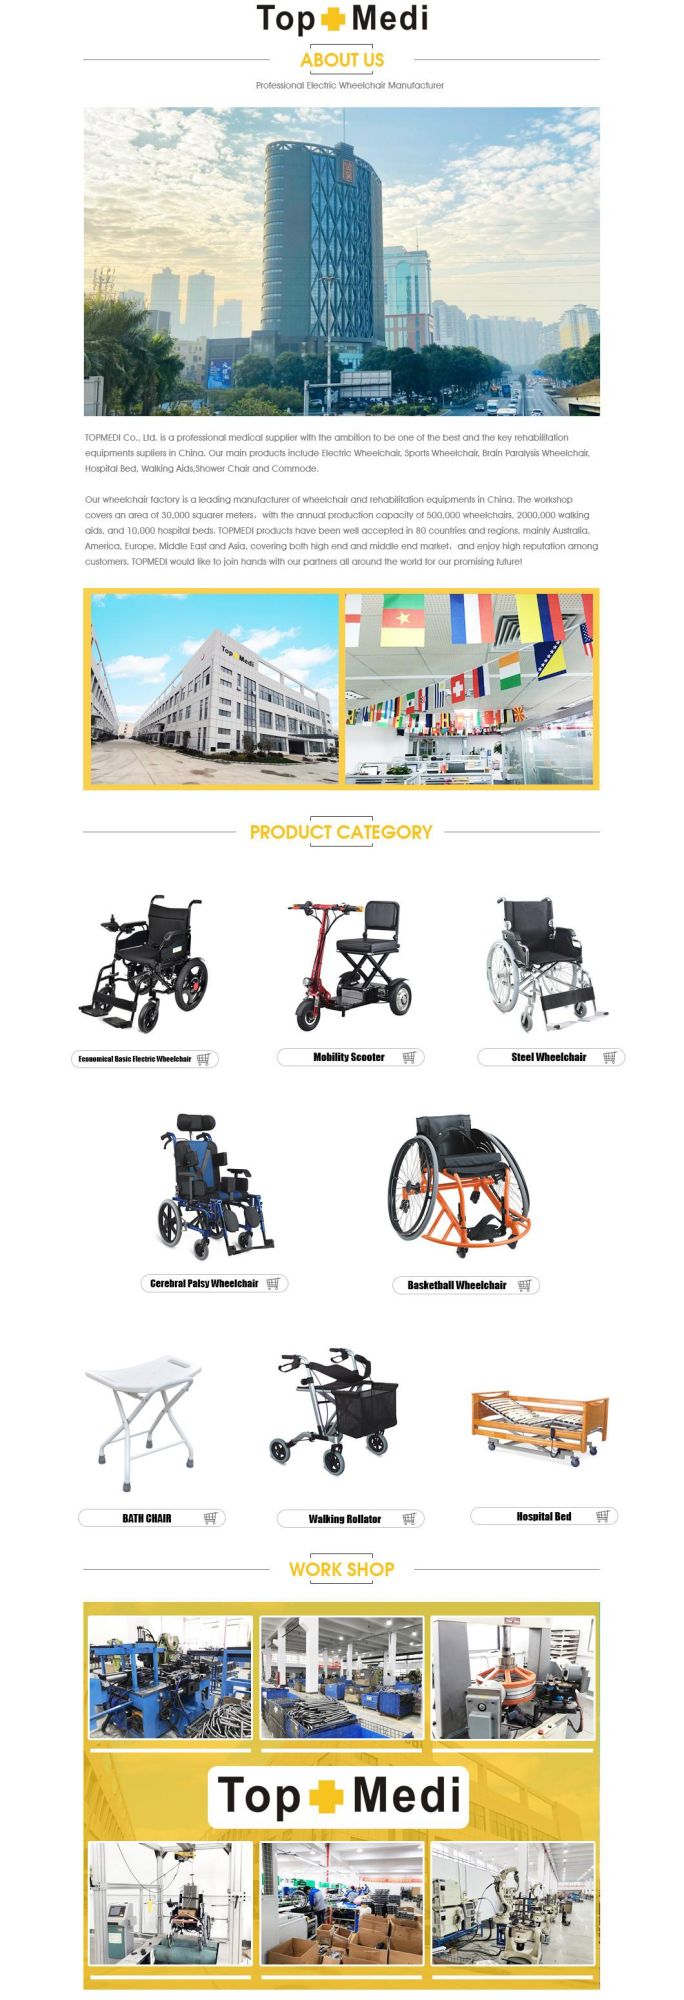 Rehabilitation Electric Wheelchair for The Elderly in a Variety of Colors